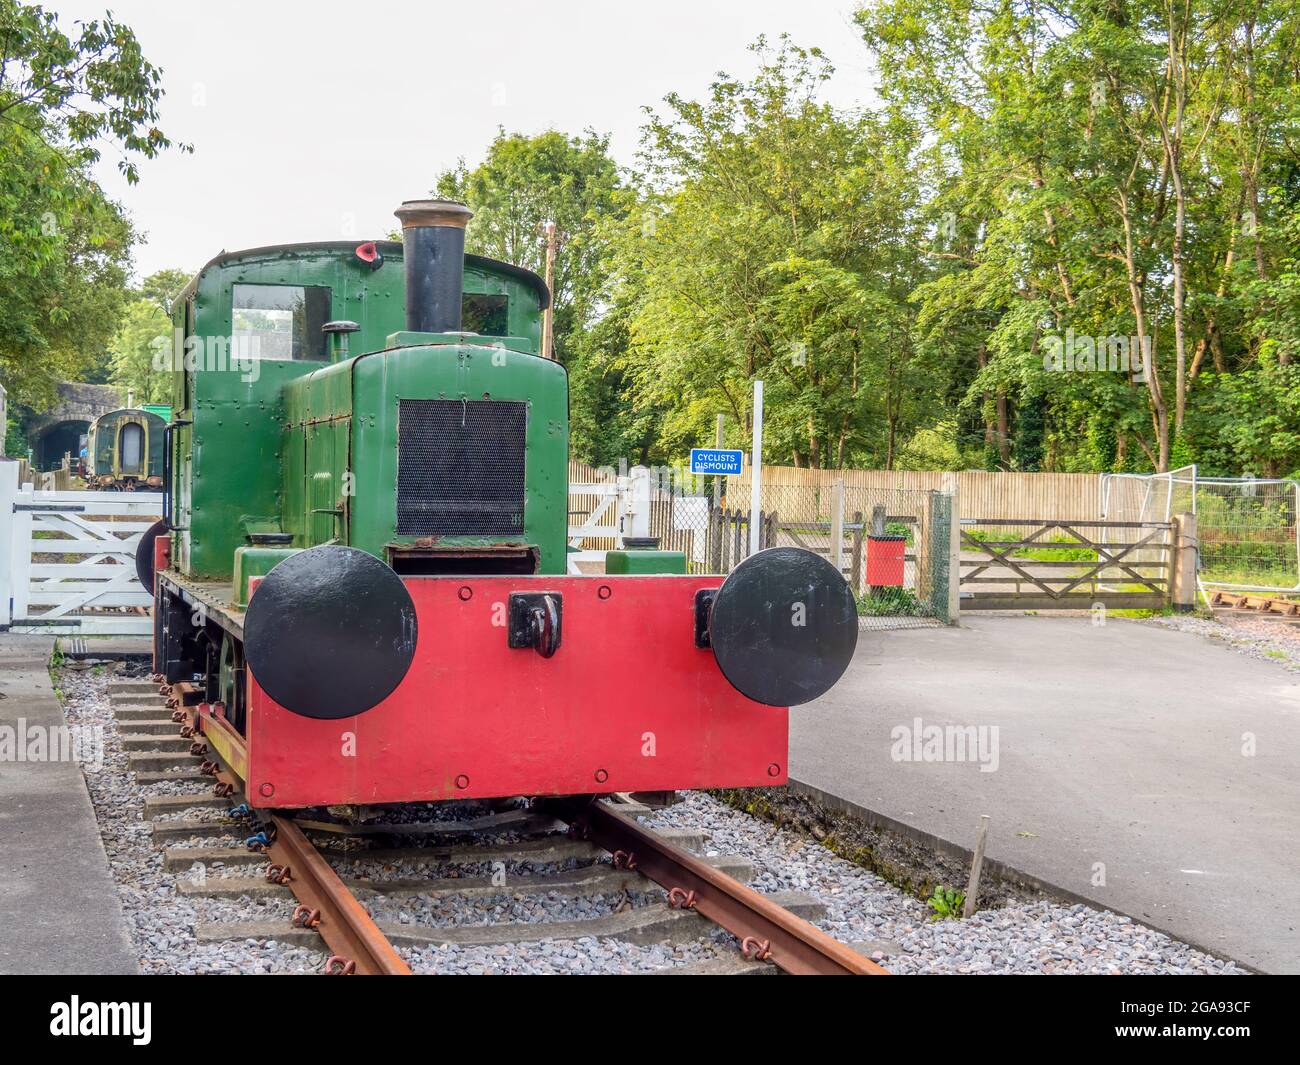 GREAT TORRINGTON, NORTH DEVON - JULY 17 2021: Vintage train near the Puffing Billy licensed cafe. Stock Photo